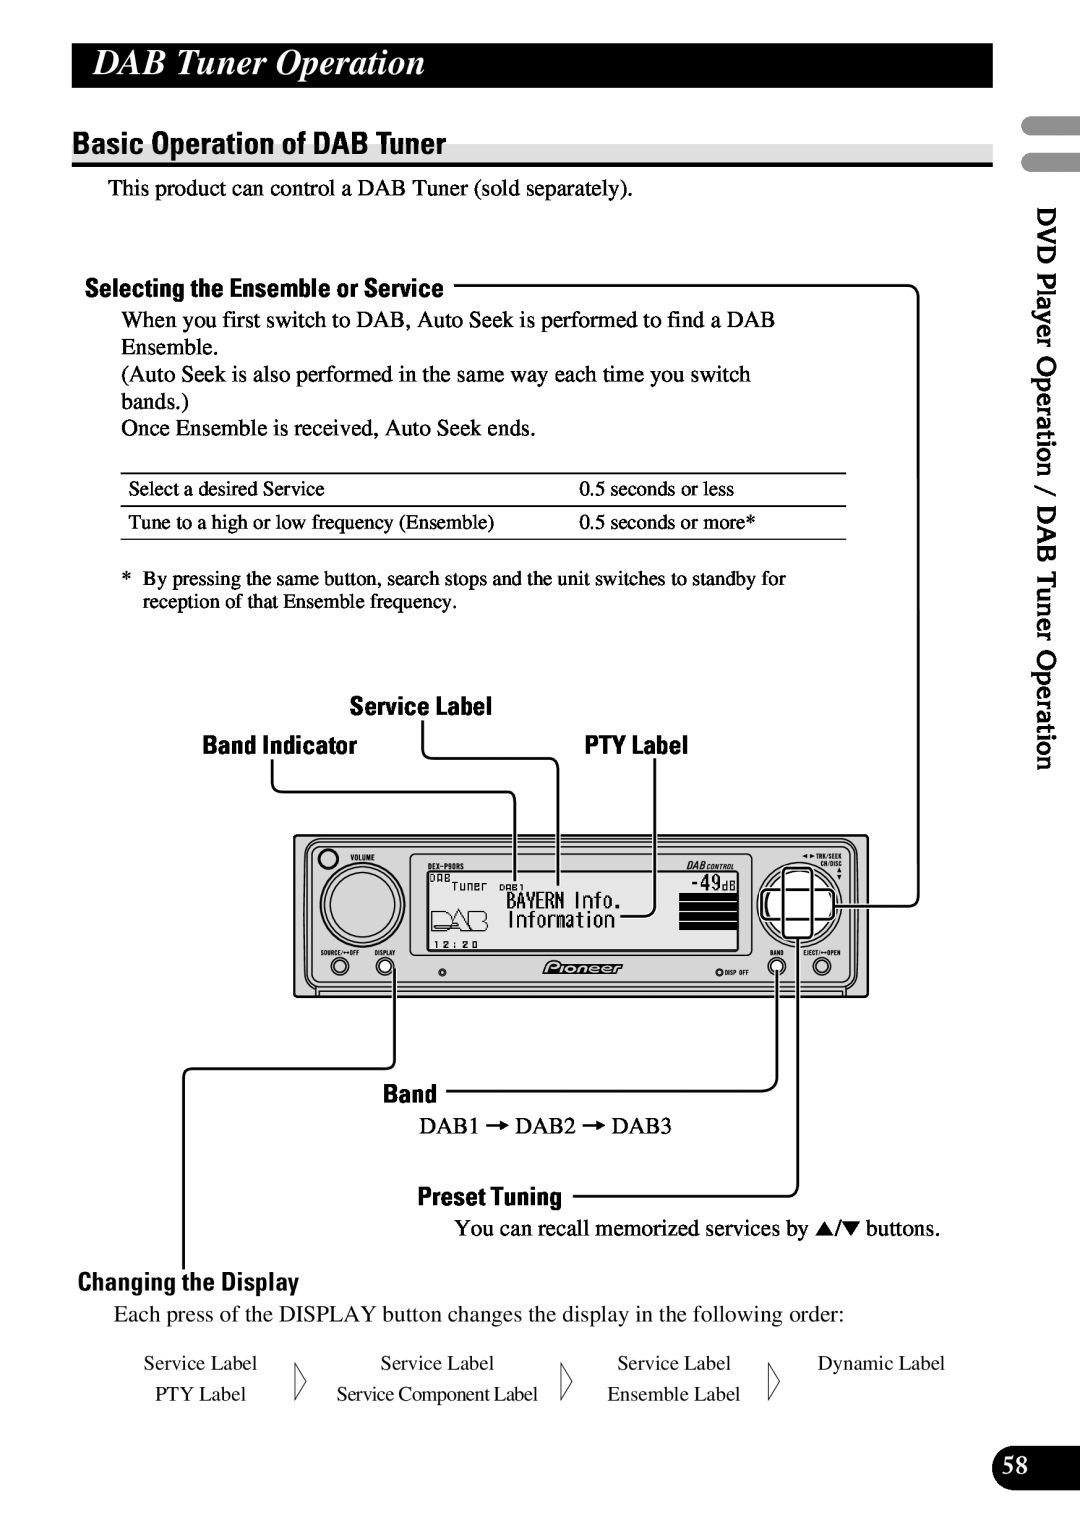 Pioneer DEX-P90RS DAB Tuner Operation, Basic Operation of DAB Tuner, Selecting the Ensemble or Service, Service Label 